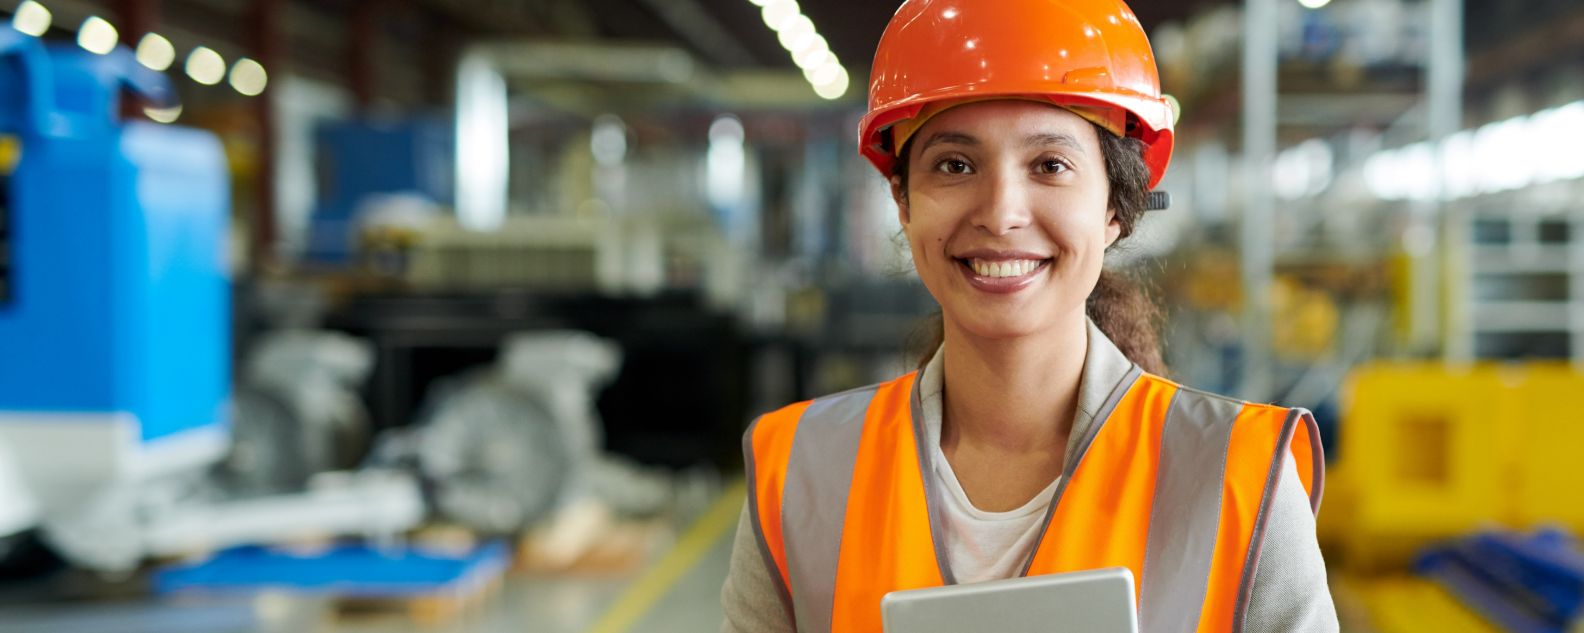 Woman wearing hardhat smiling looking at camera in production workshop